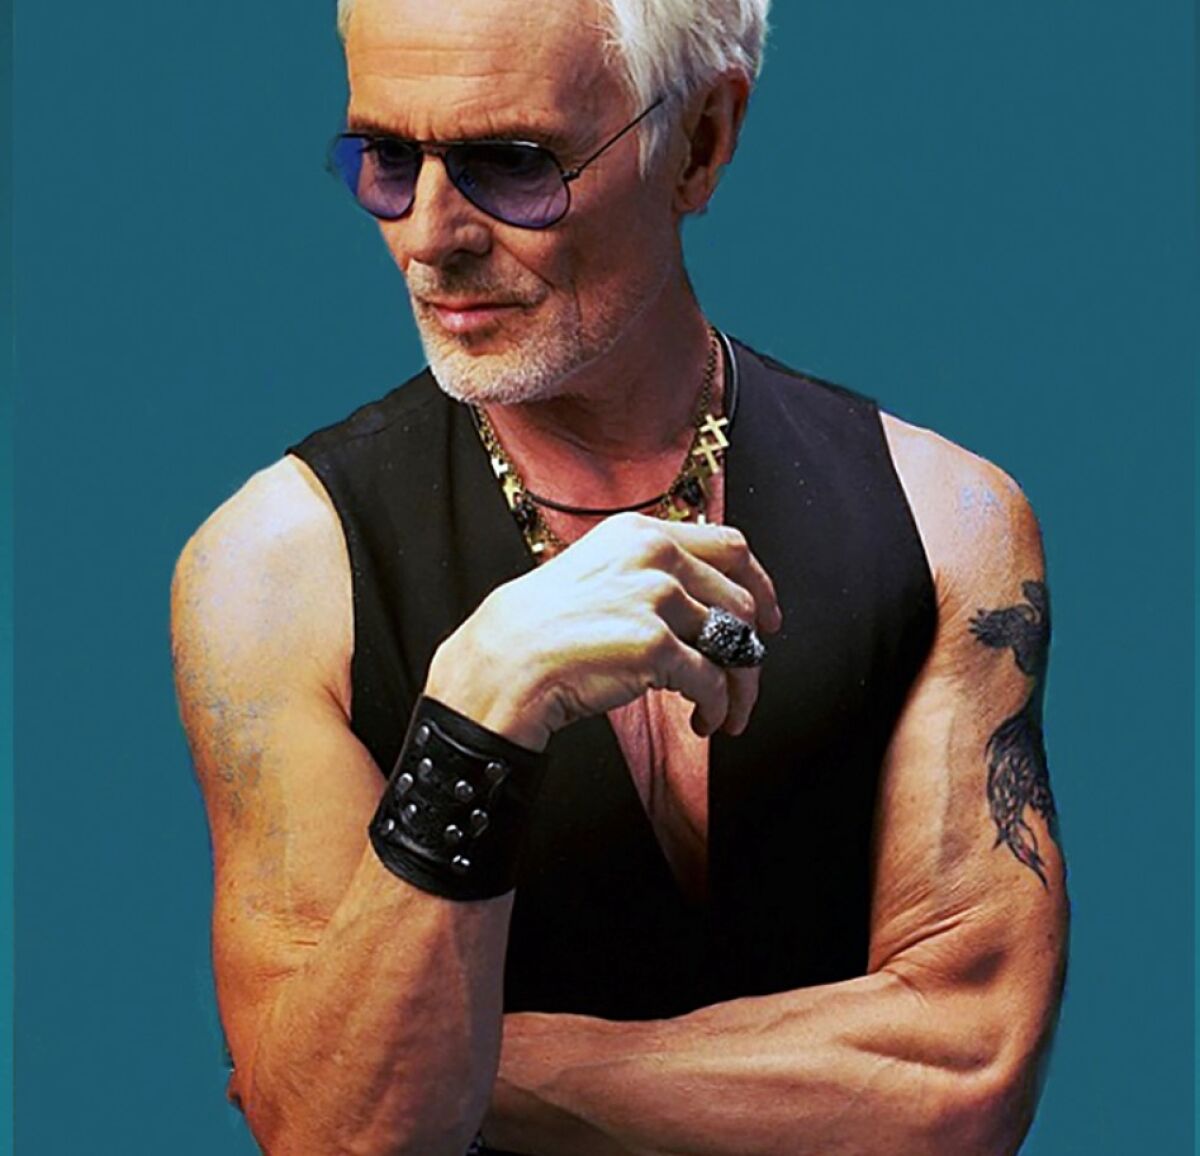  Michael Des Barres is the subject of the new documentary, "Michael Des Barres: Who Do You Want Me to Be?"